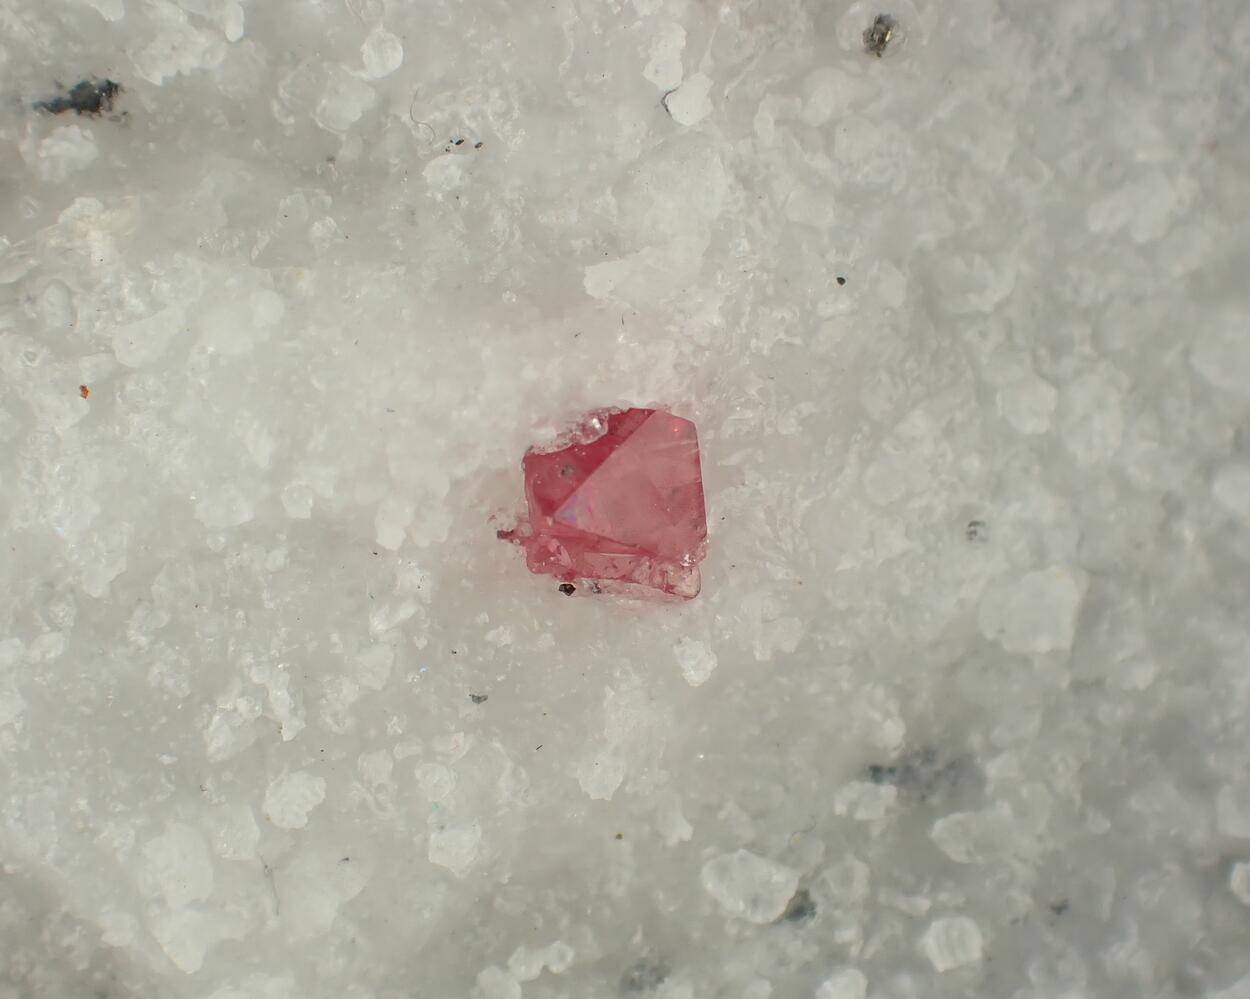 Spinel & Clinohumite